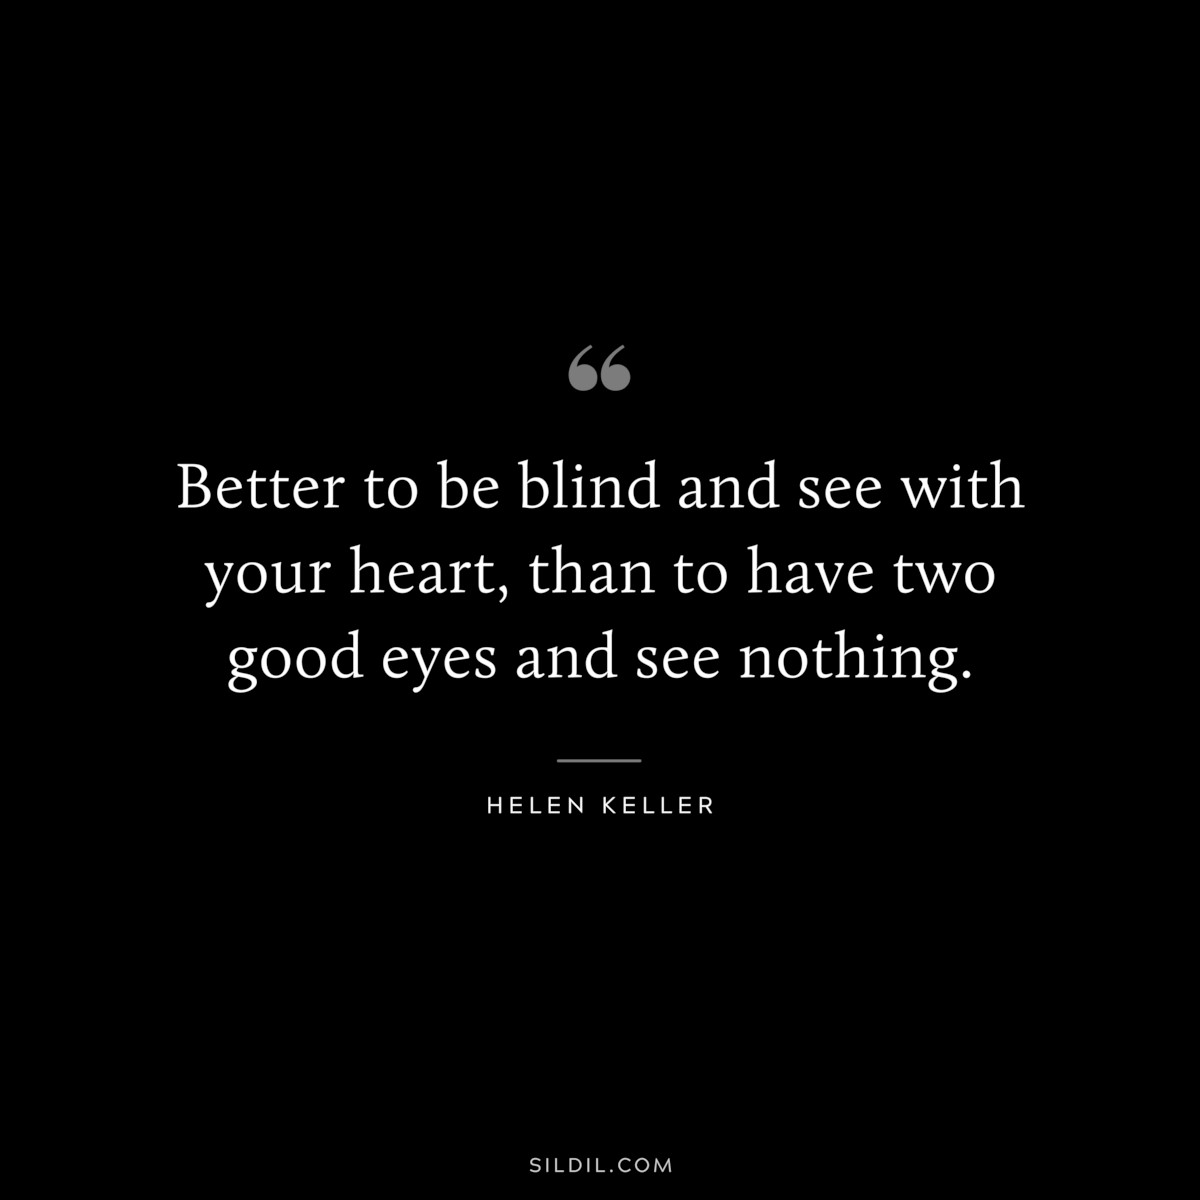 Better to be blind and see with your heart, than to have two good eyes and see nothing. ― Helen Keller